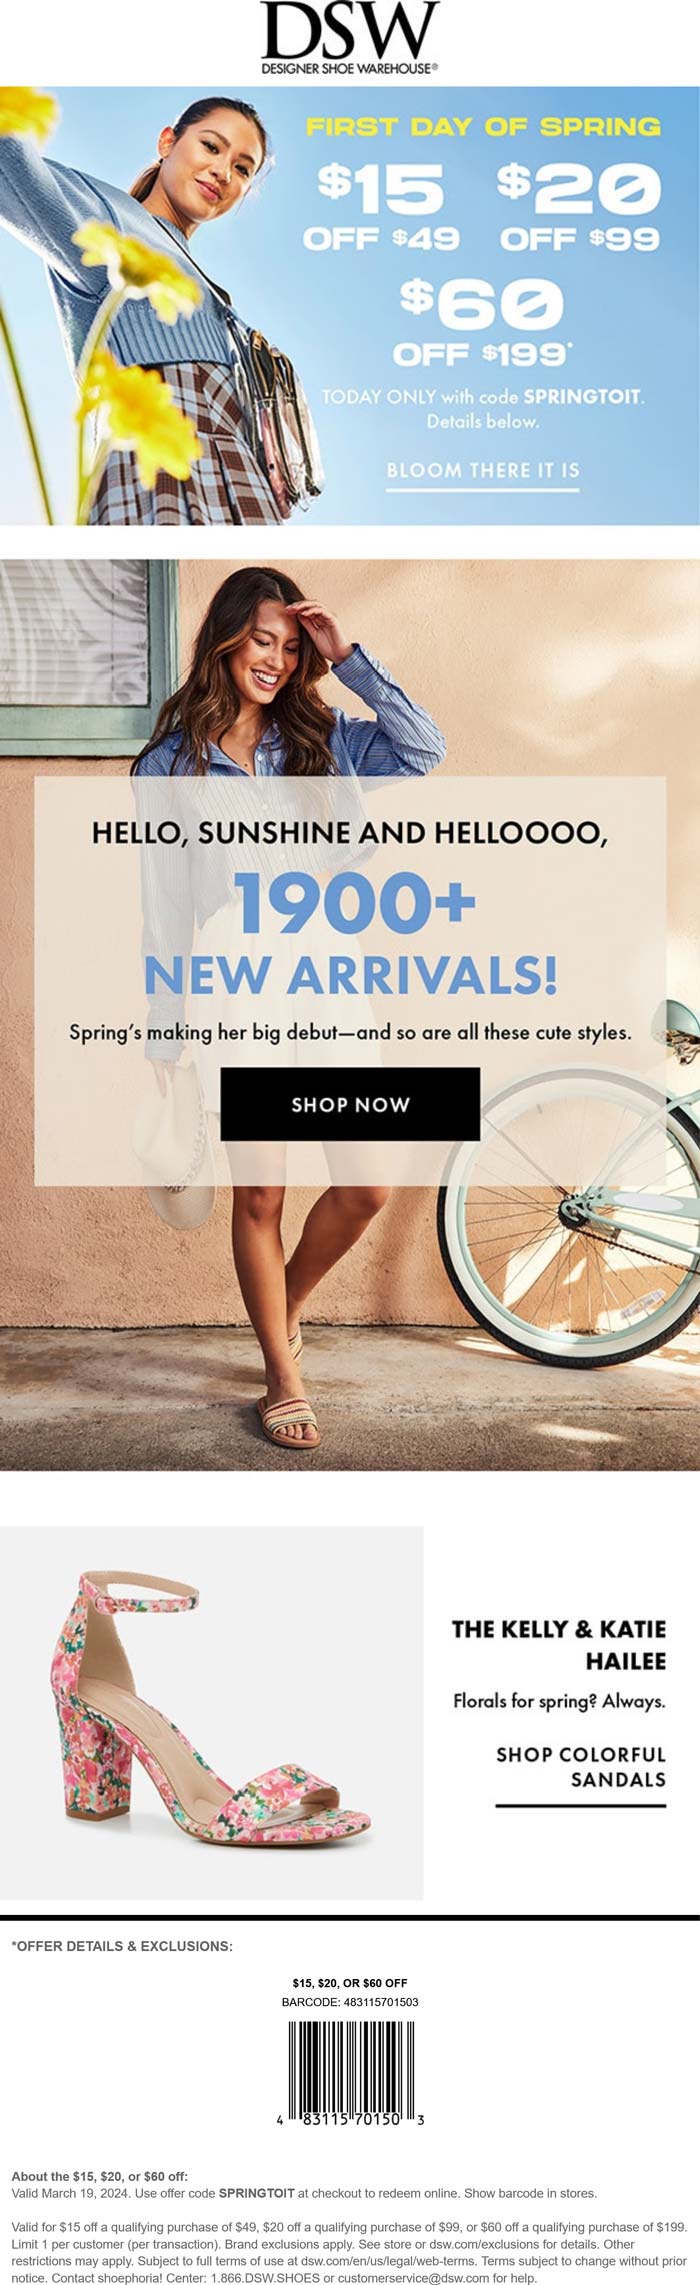 DSW stores Coupon  $15-$60 off $49+ today at DSW, or online via promo code SPRINGTOIT #dsw 